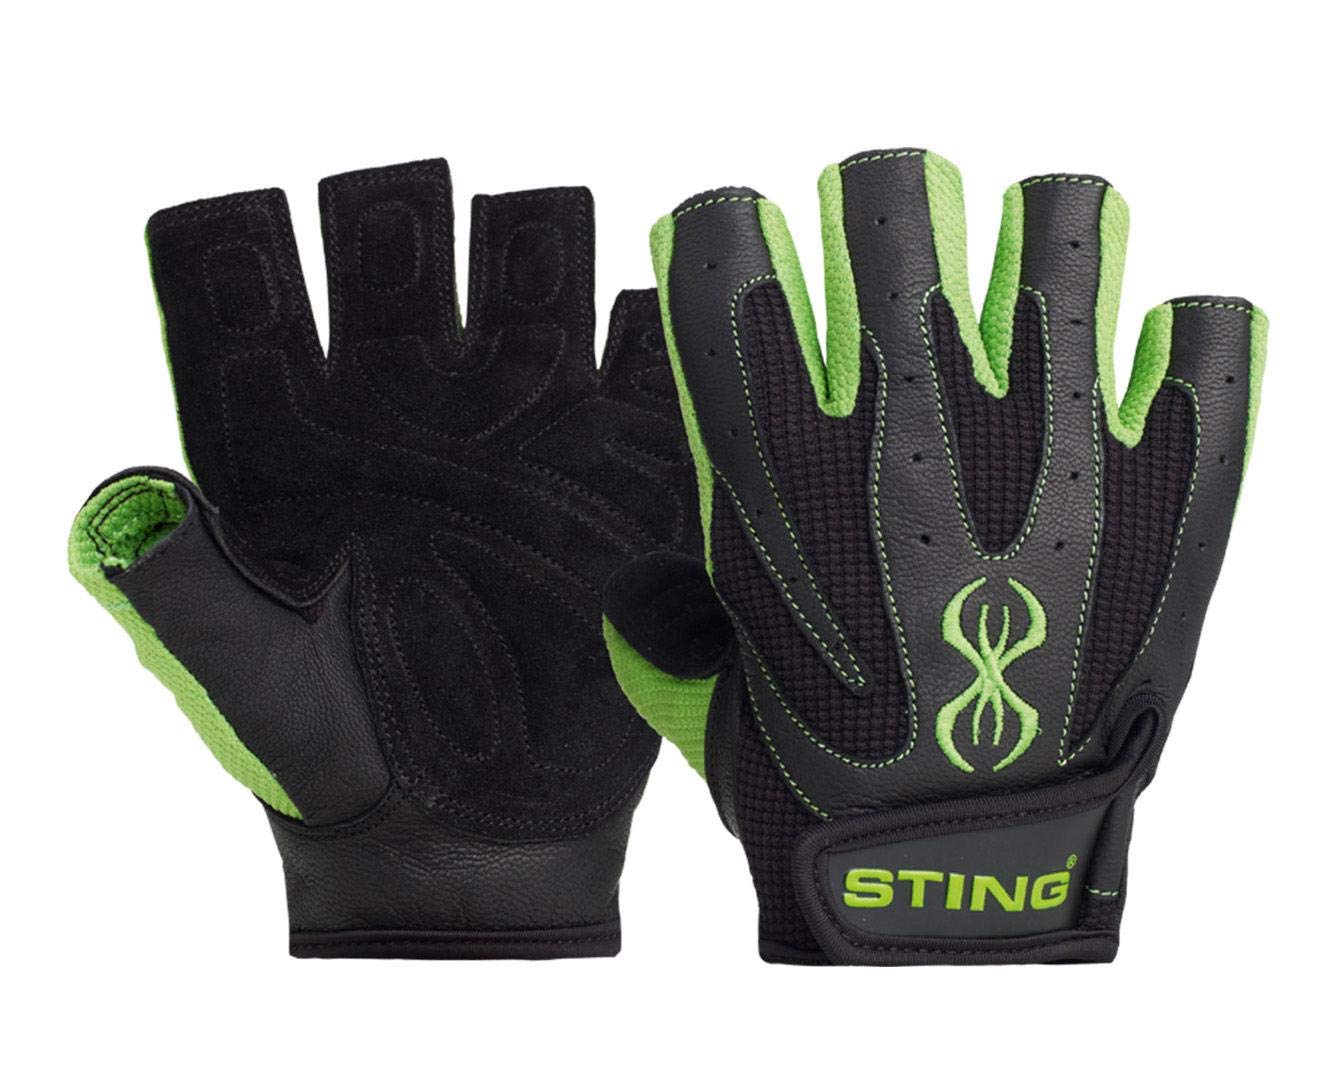 Sting Training Glove Black Green Front and Back View